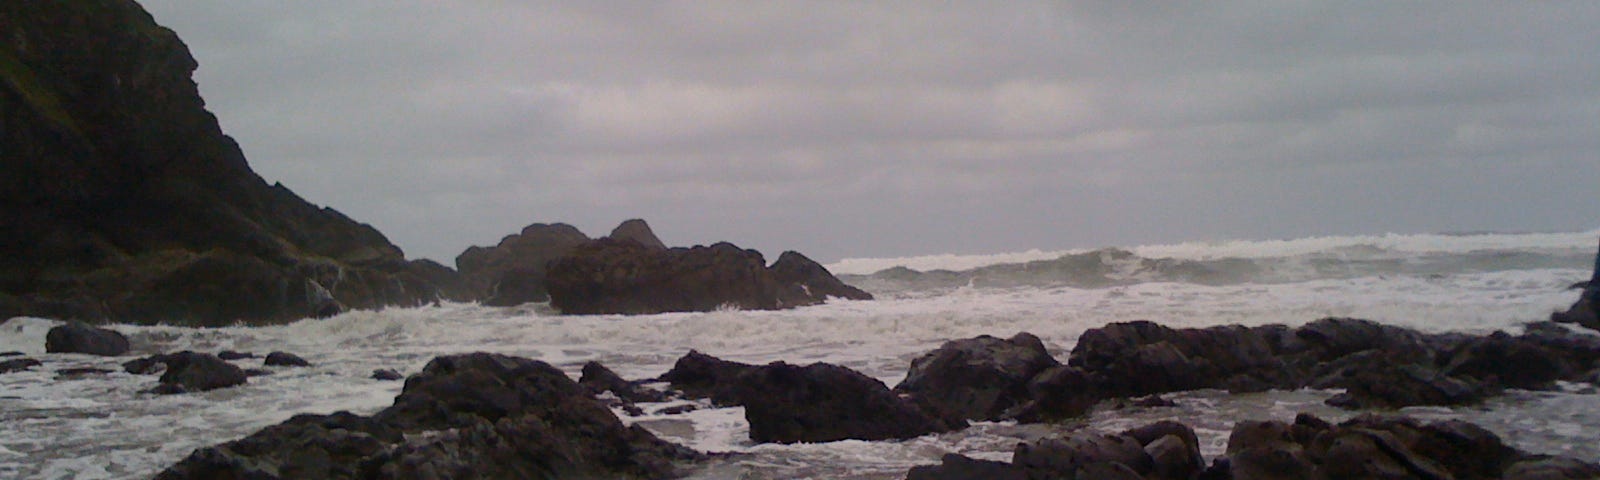 A rocky shoreline on a cloudy day